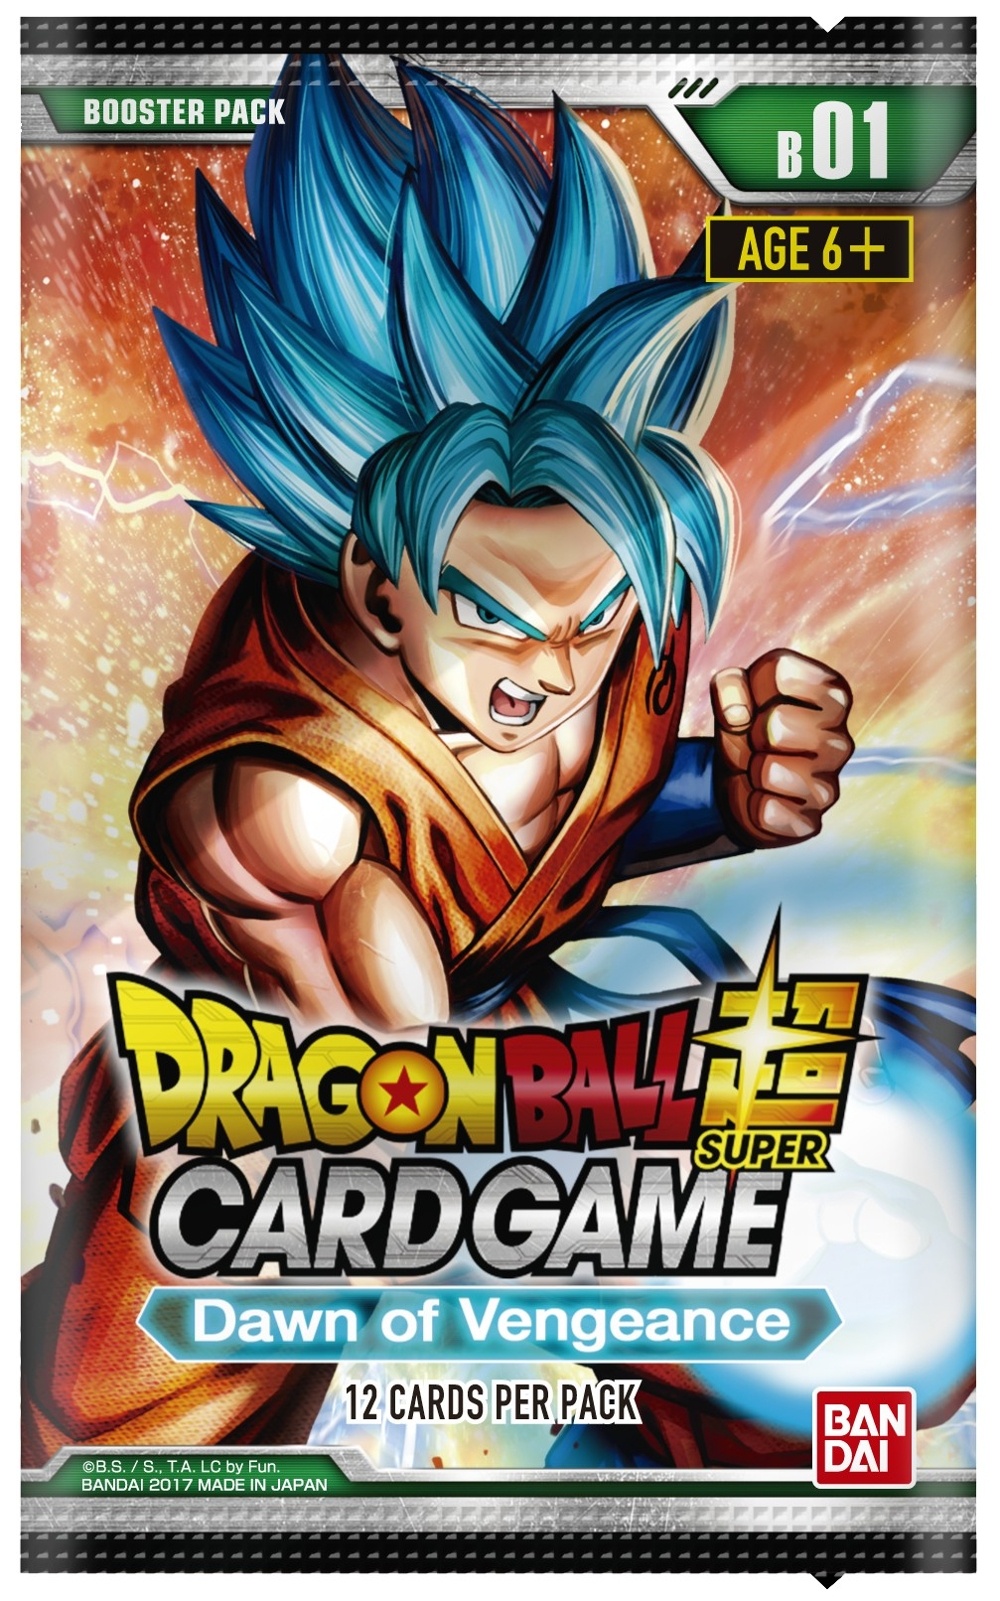 ICv2: The 'Dragon Ball' Universe Returns in New TCG | Image 3